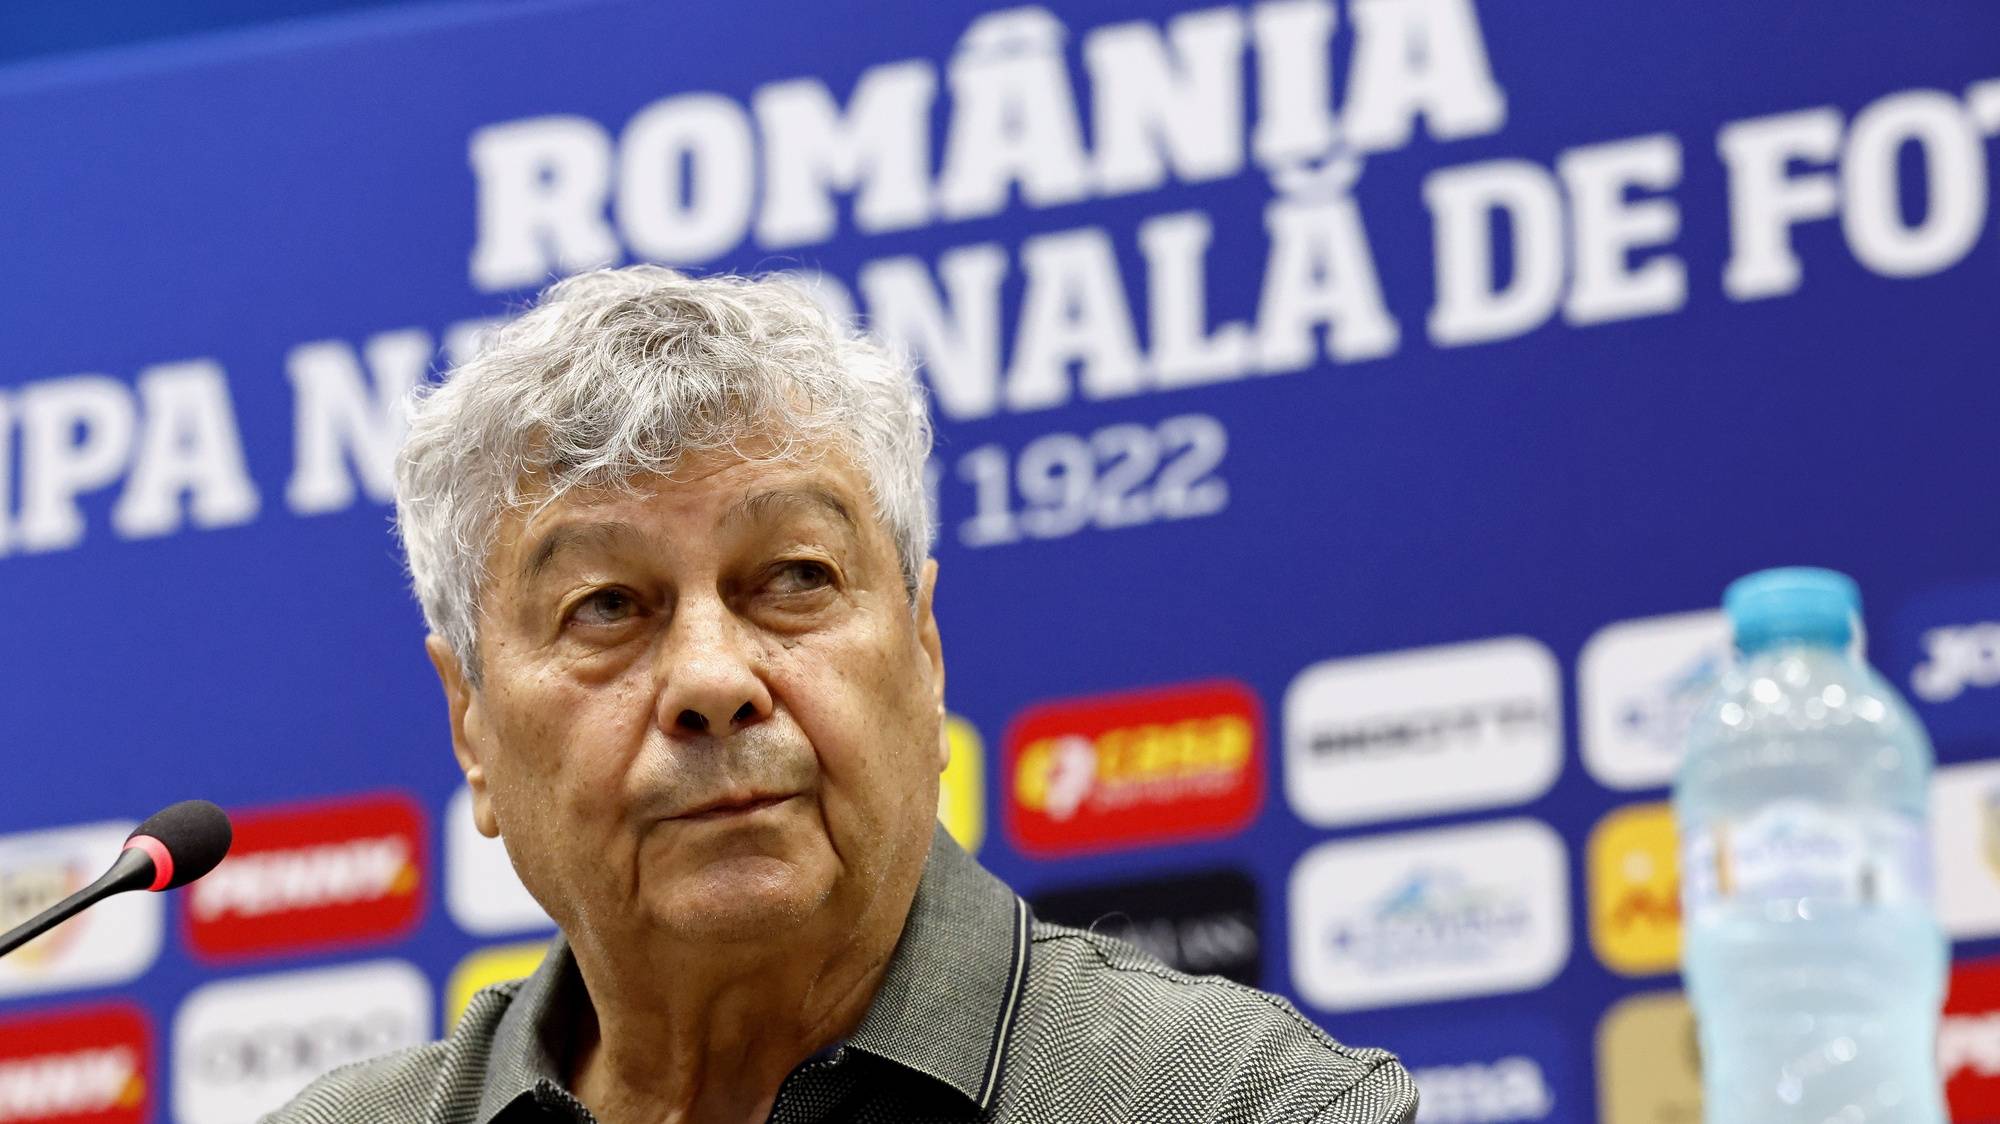 epa11530110 Newly appointed manager of the Romanian national soccer team, Mircea Lucescu, 79, delivers his speech during a press conference held at the Romanian Soccer Federation (FRF) headquarters in Bucharest, Romania, August 06, 2024. Former Romanian national team head coach Edi Iordanescu , resigned after the final of the final tournament of the European football championship UEFA EURO 2024. Mircea Lucescu has signed a 2-year contract with FRF, aiming to qualify Romania for the 2026 World Cup. He will have a salary of 27,000 euros per month and a qualification bonus for the 2026 World Cup, worth 200,000 euros. Mircea Lucescu, ranked third in terms of official trophies won (with 38), became the fifth person to coach in 100 UEFA Champions League matches, joining the likes of Alex Ferguson, Carlo Ancelotti, Arsene Wenger and Jose Mourinho.  EPA/Robert Ghement